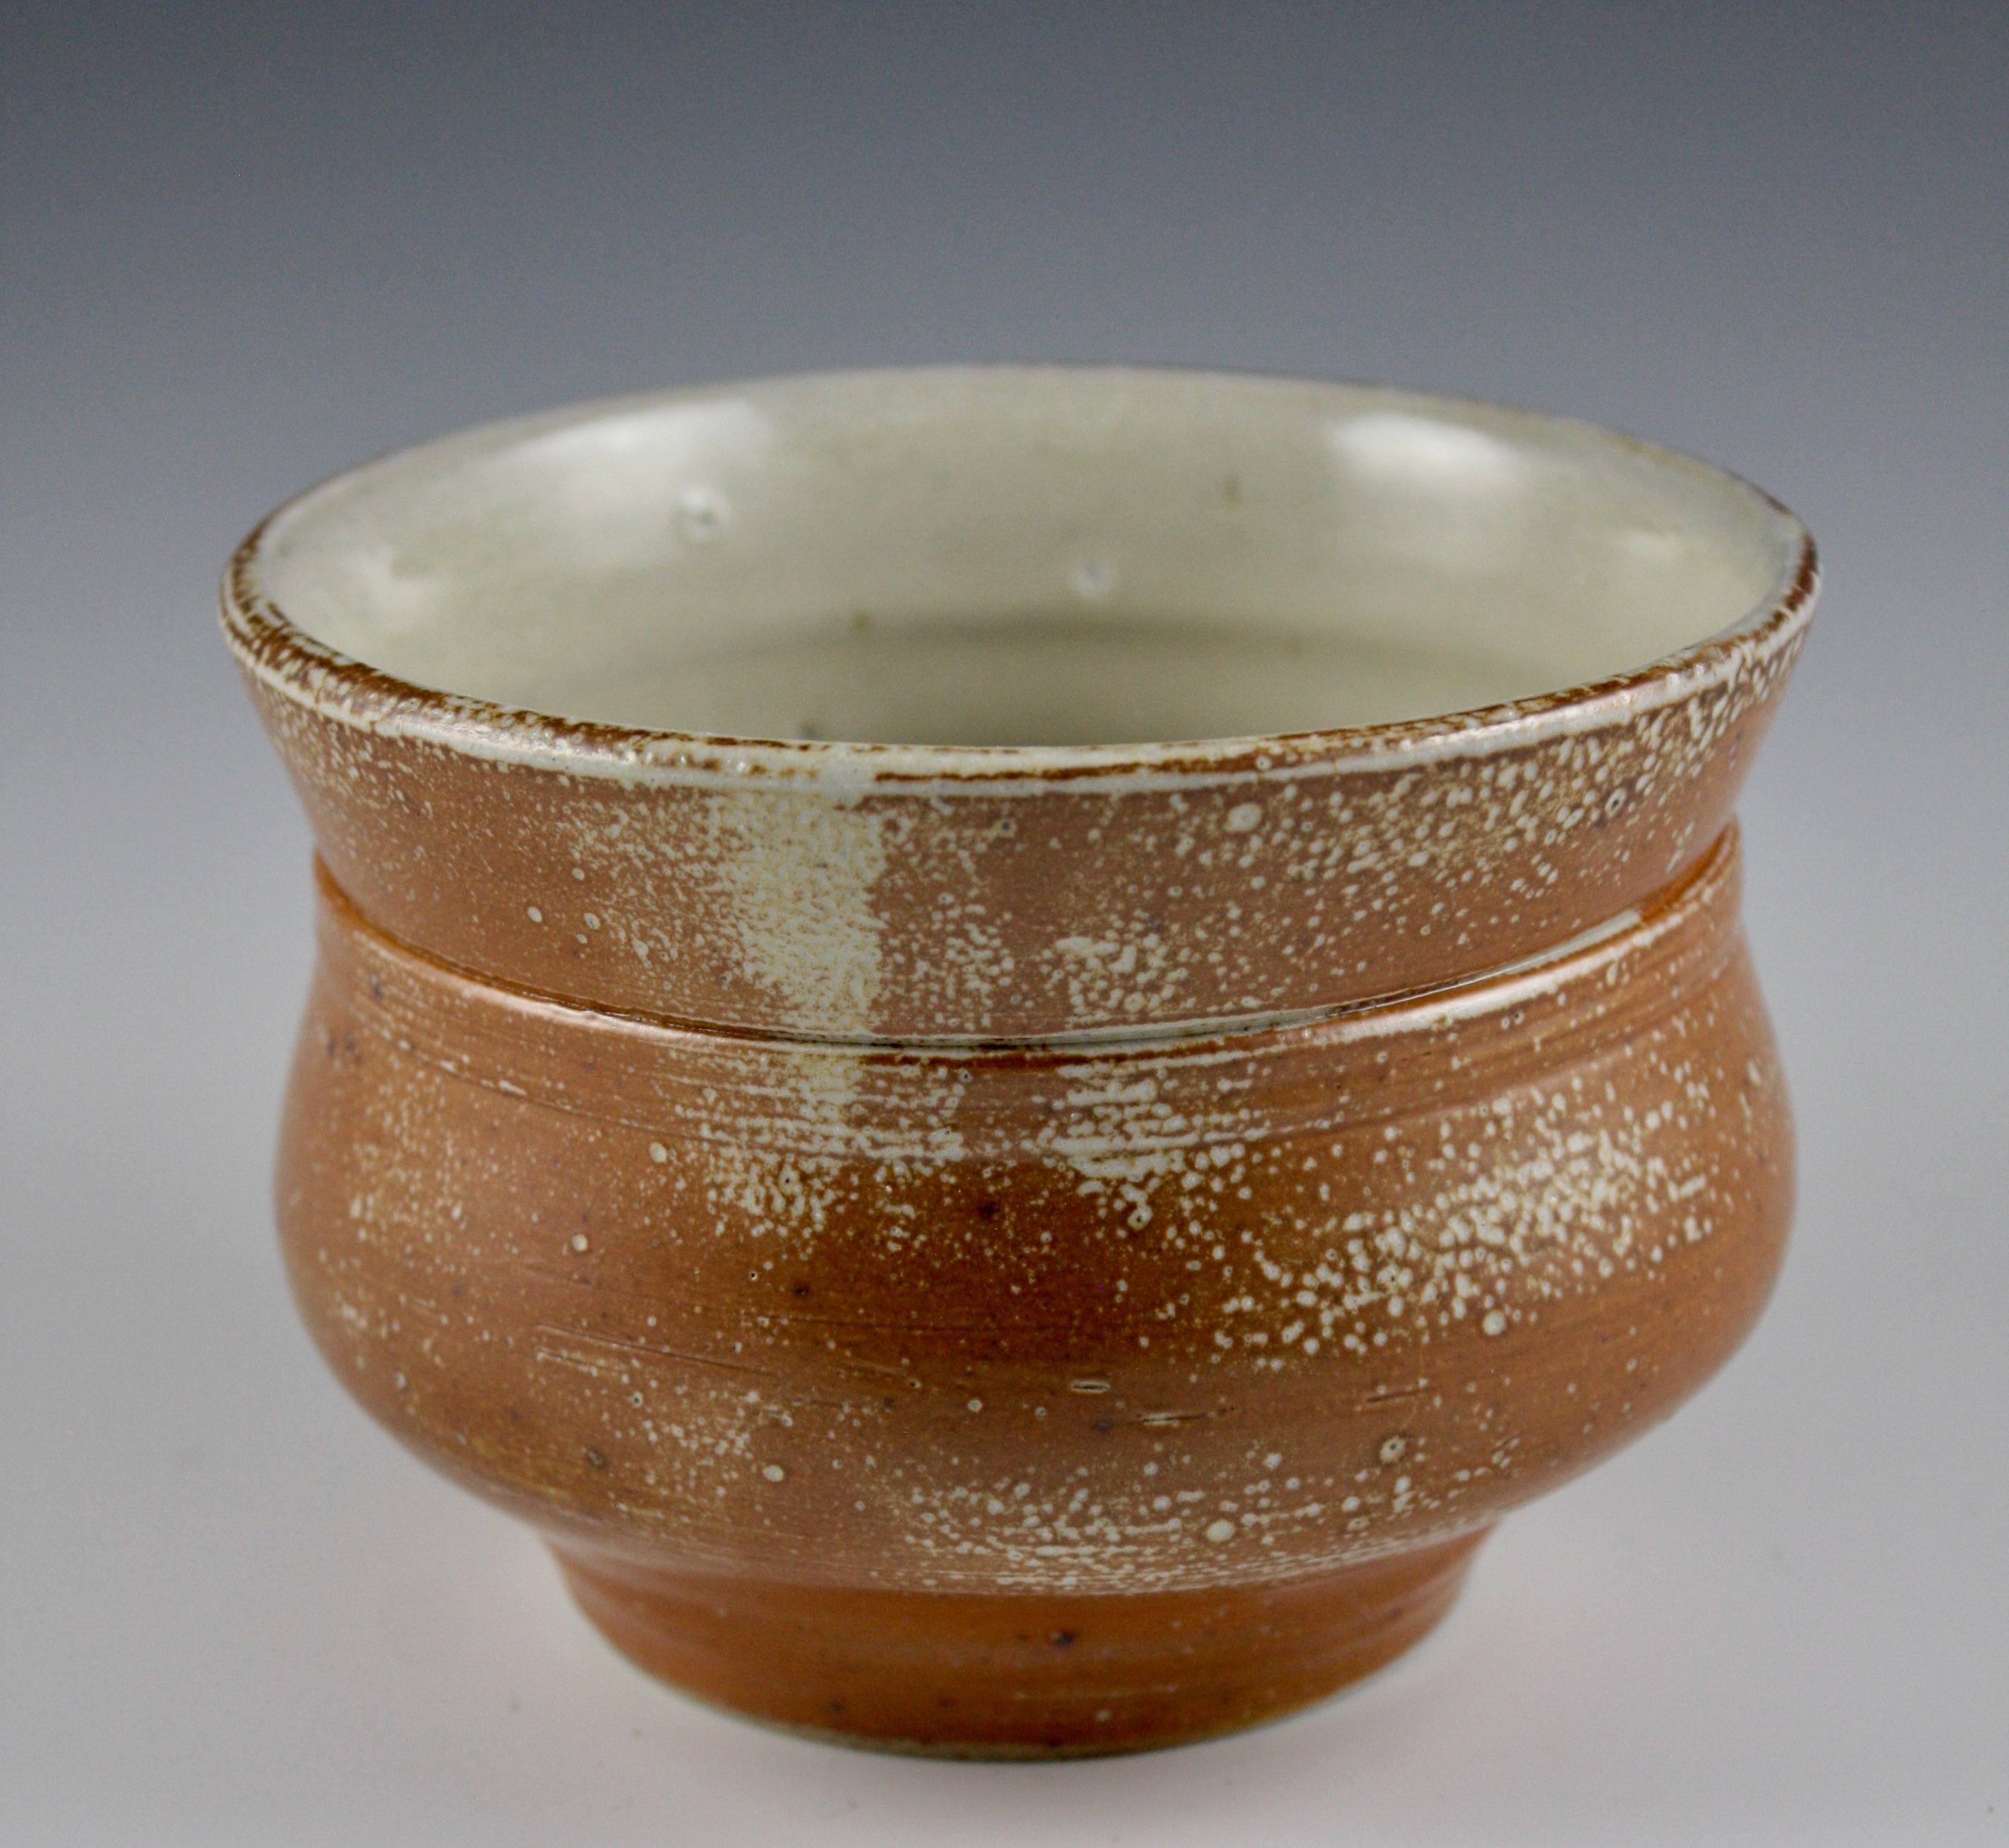 Spittoon-Shaped Bowl #26